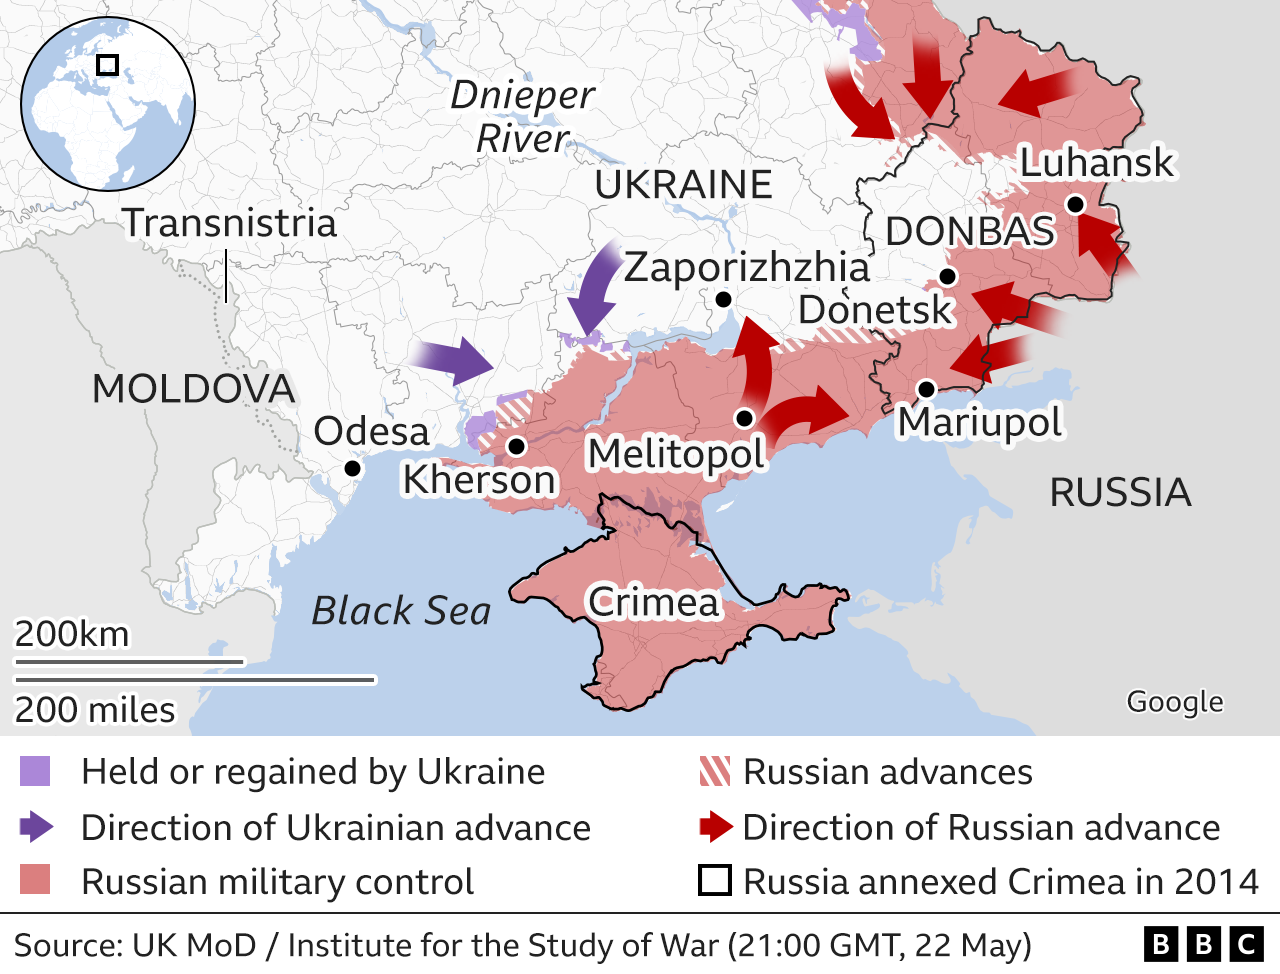 Donbas: Why Russia is trying to capture eastern Ukraine - BBC News